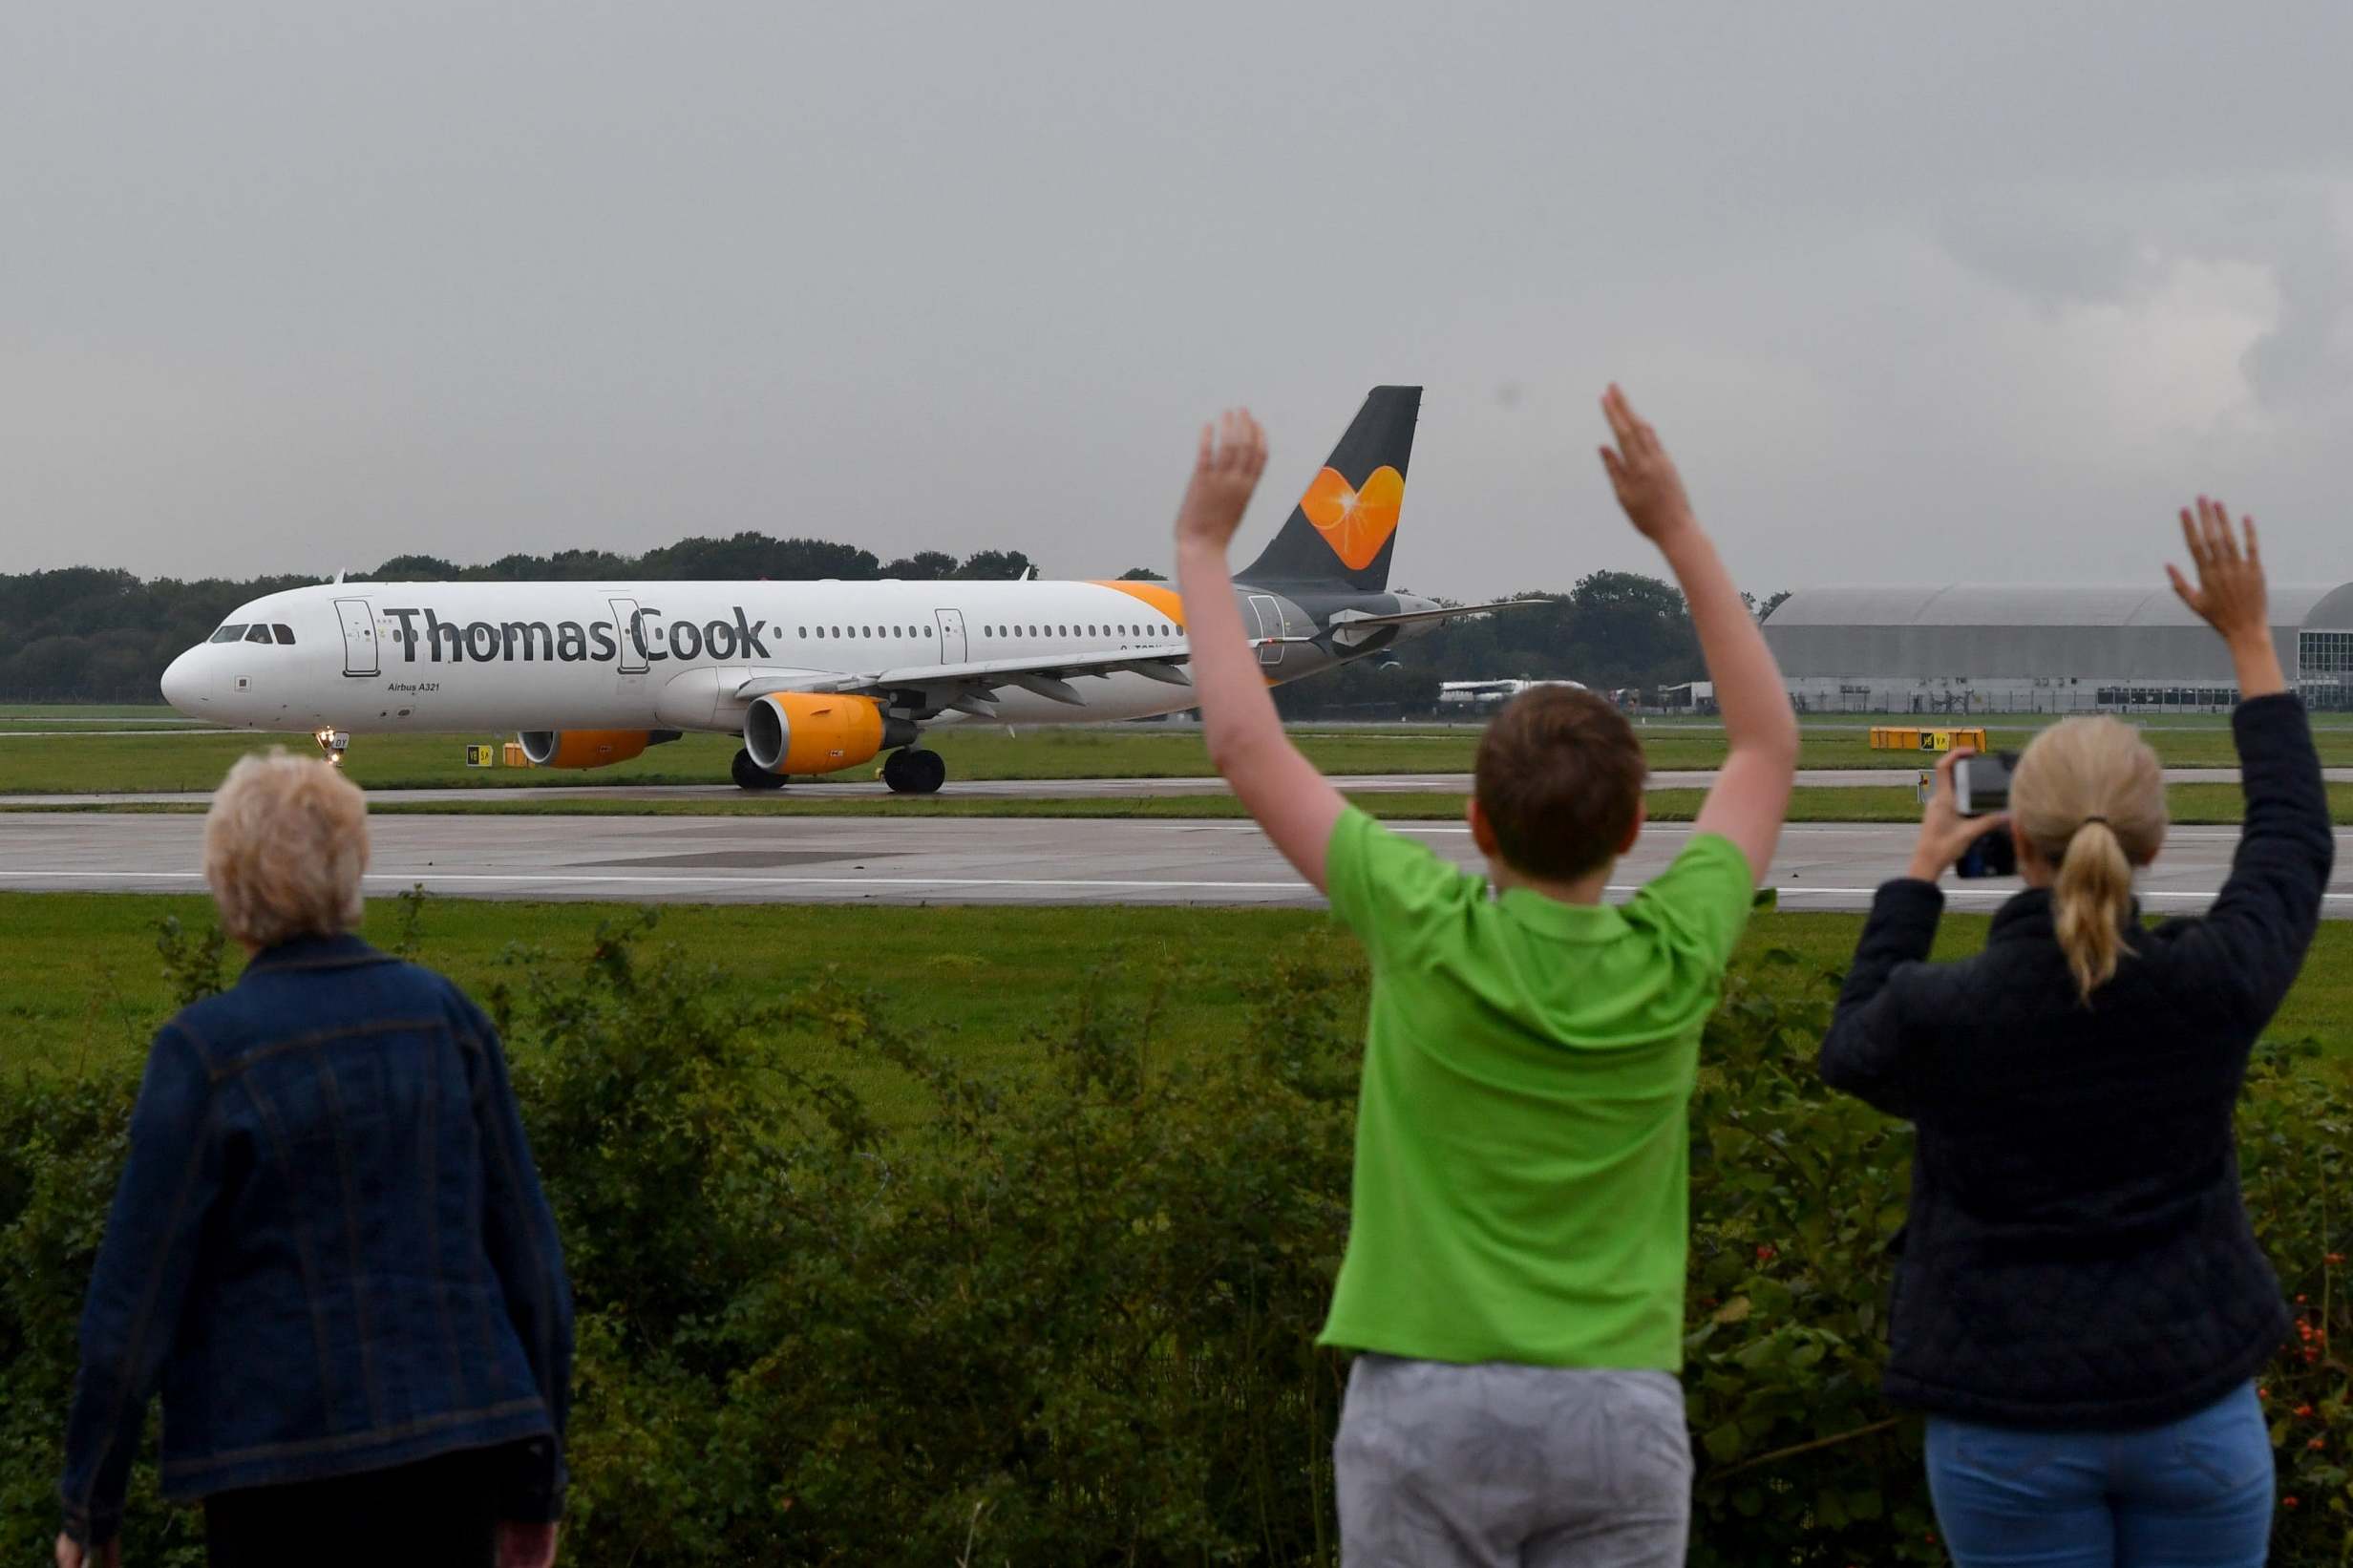  The pilot's family members wave as a Thomas Cook aircraft departs from Manchester Airport